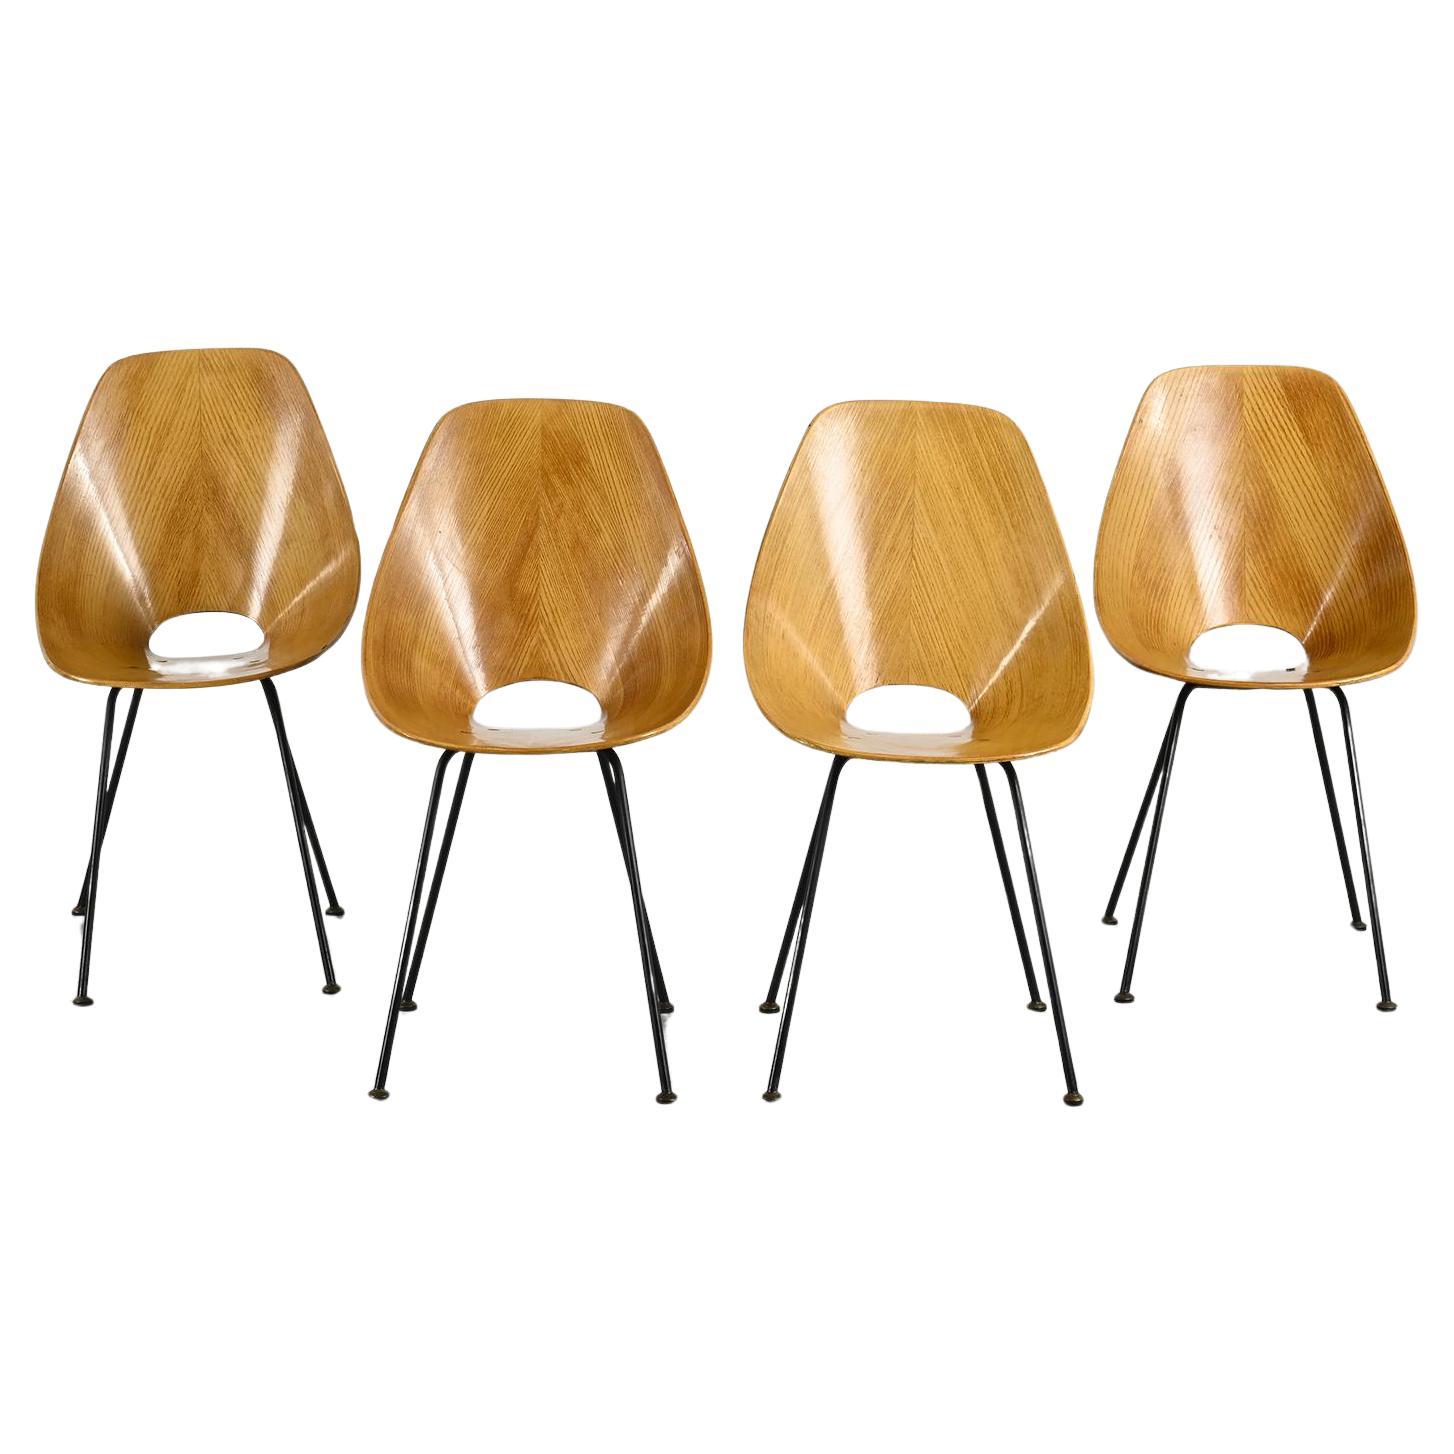 Medea Chairs by Vittorio Nobili 1954, Set of 4